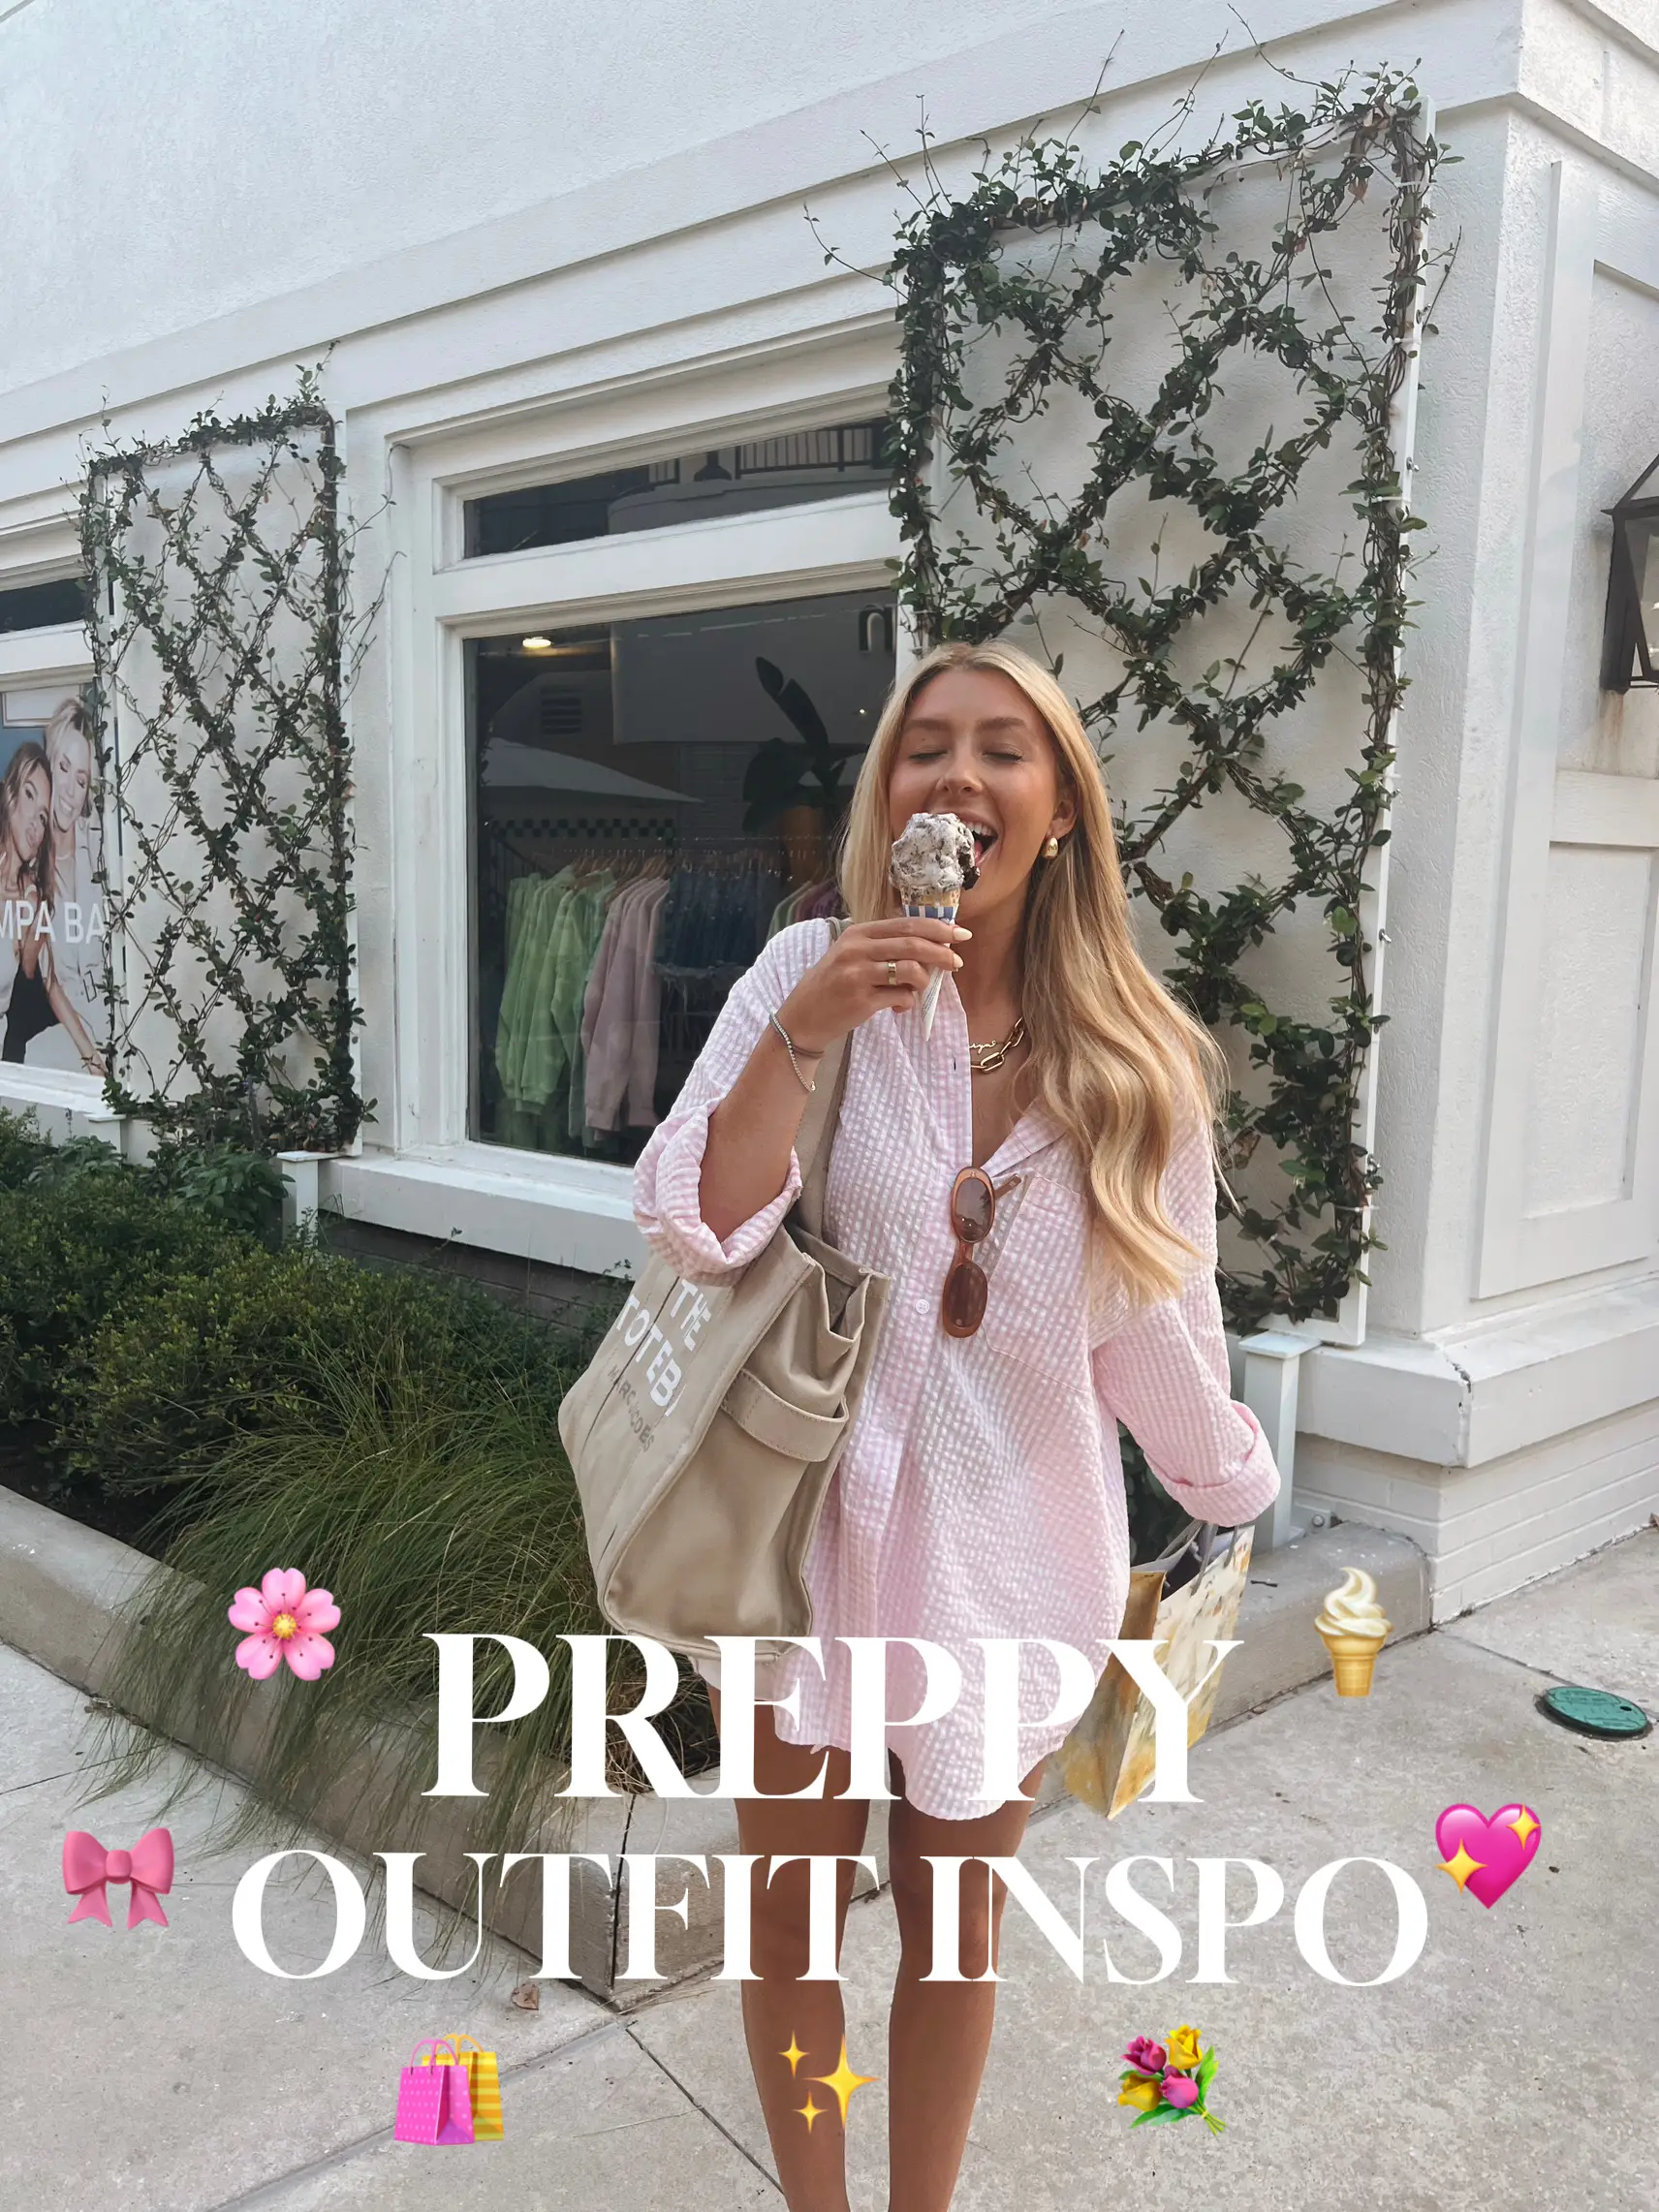 The Best Preppy Style Guide - 20 Chic Preppy Outfits